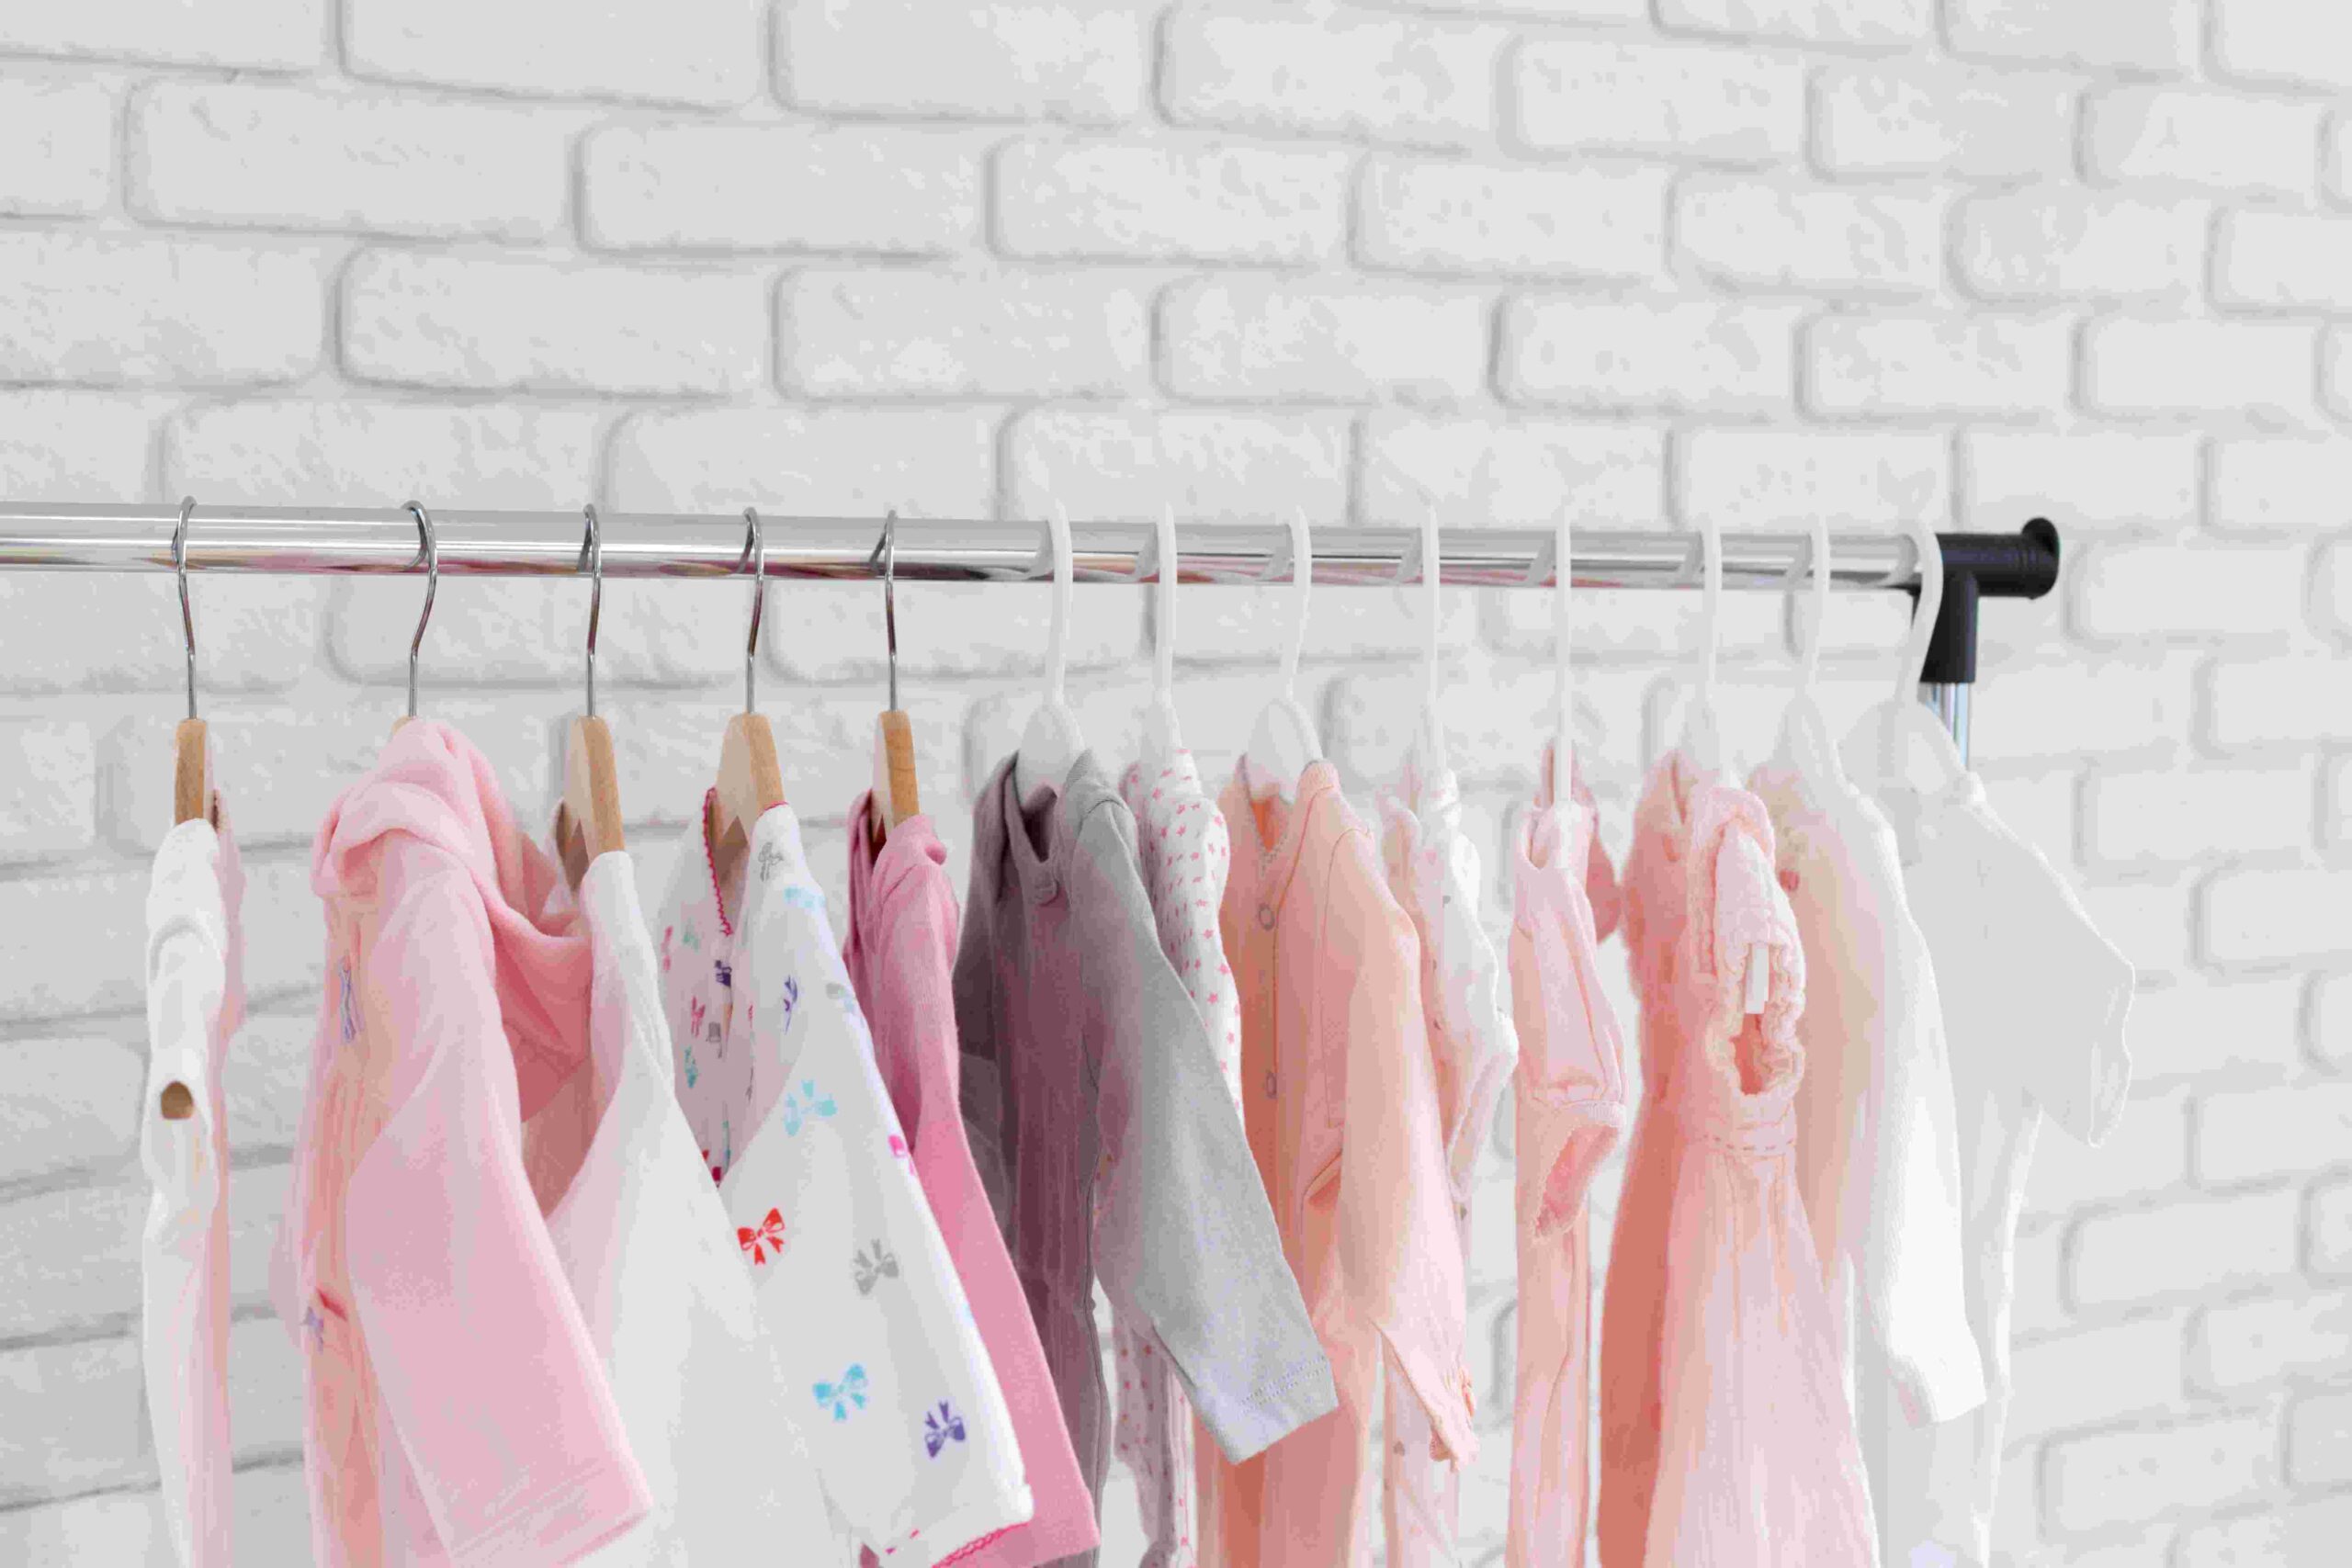 What Are The Two Main Considerations For Children’s Clothing?